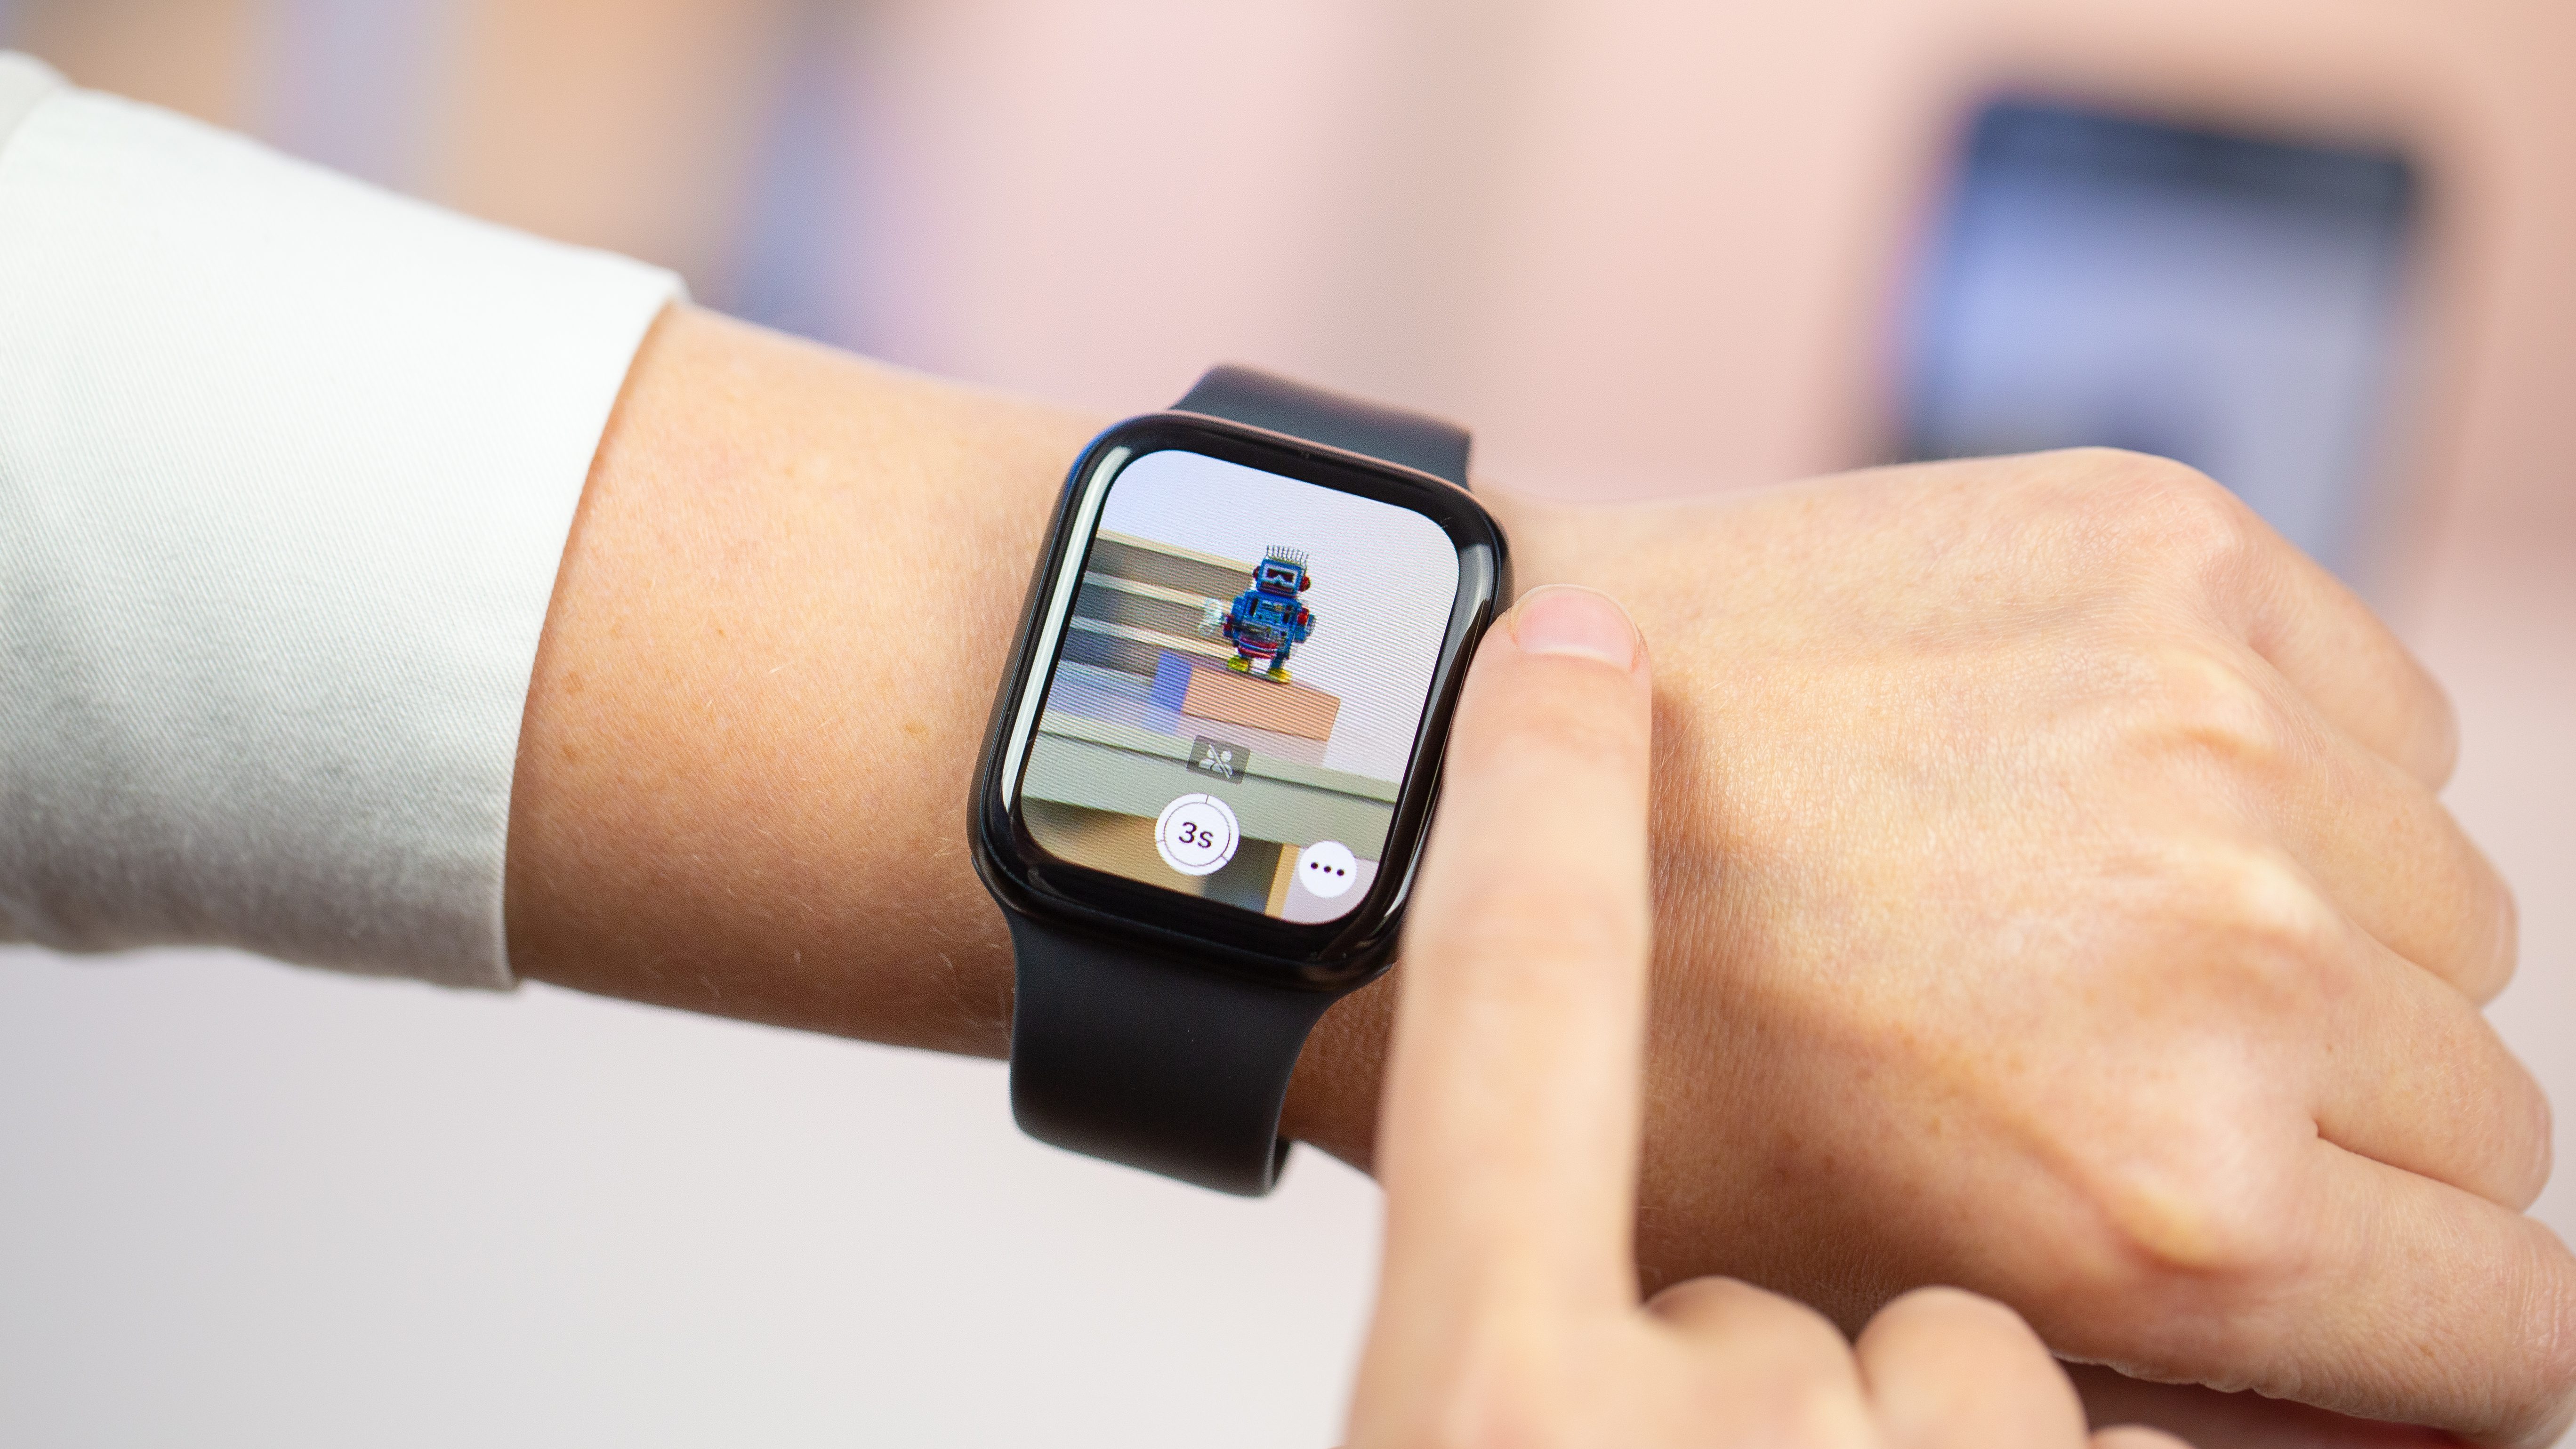 How to zoom in on your iPhone camera from your Apple Watch